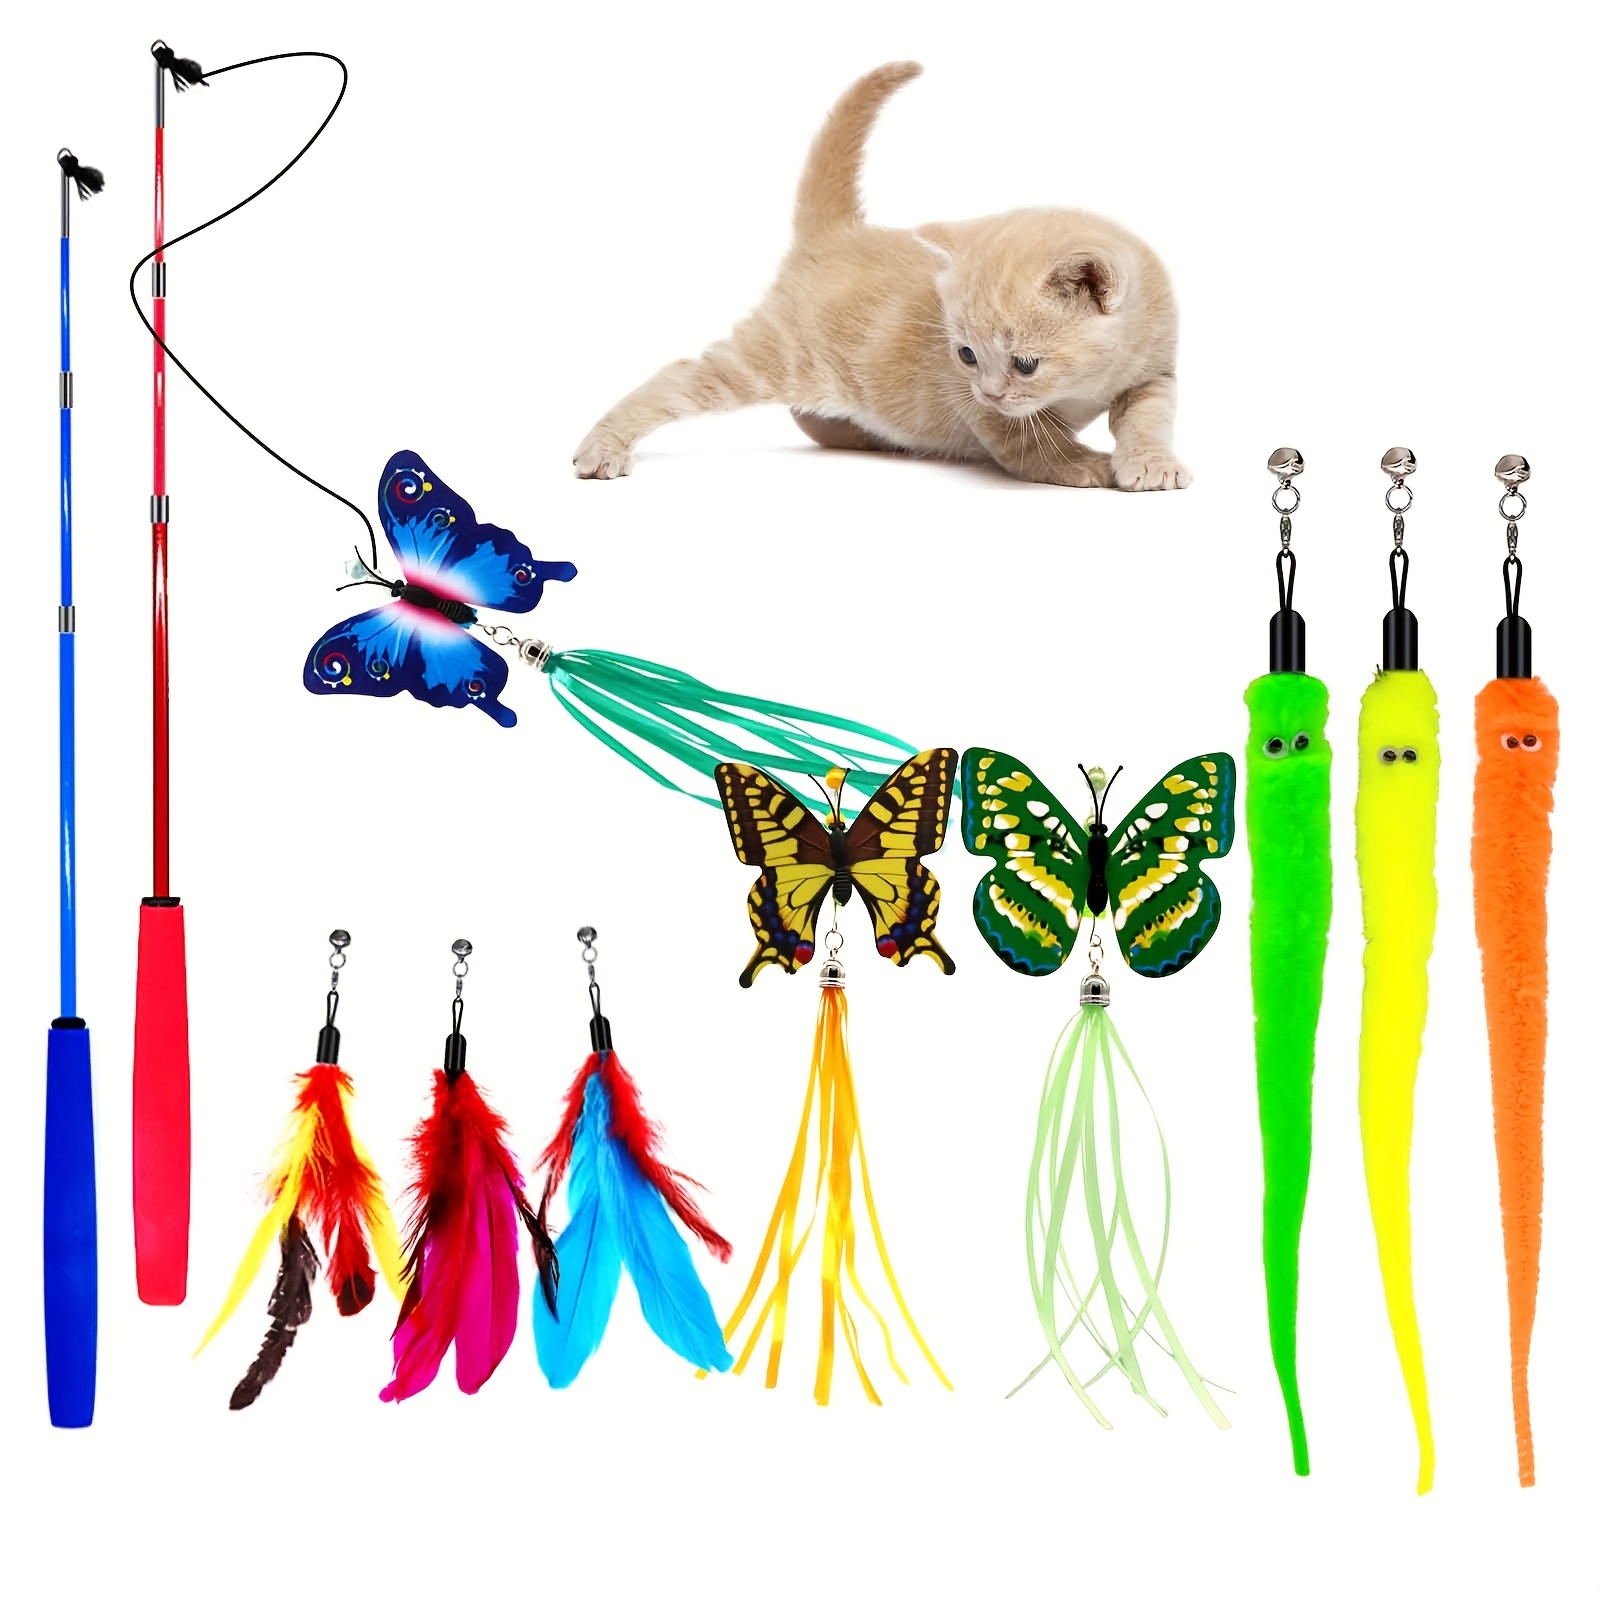 Cat Wand Toy For Indoor Cat, Retractable Cat Teaser Stick With